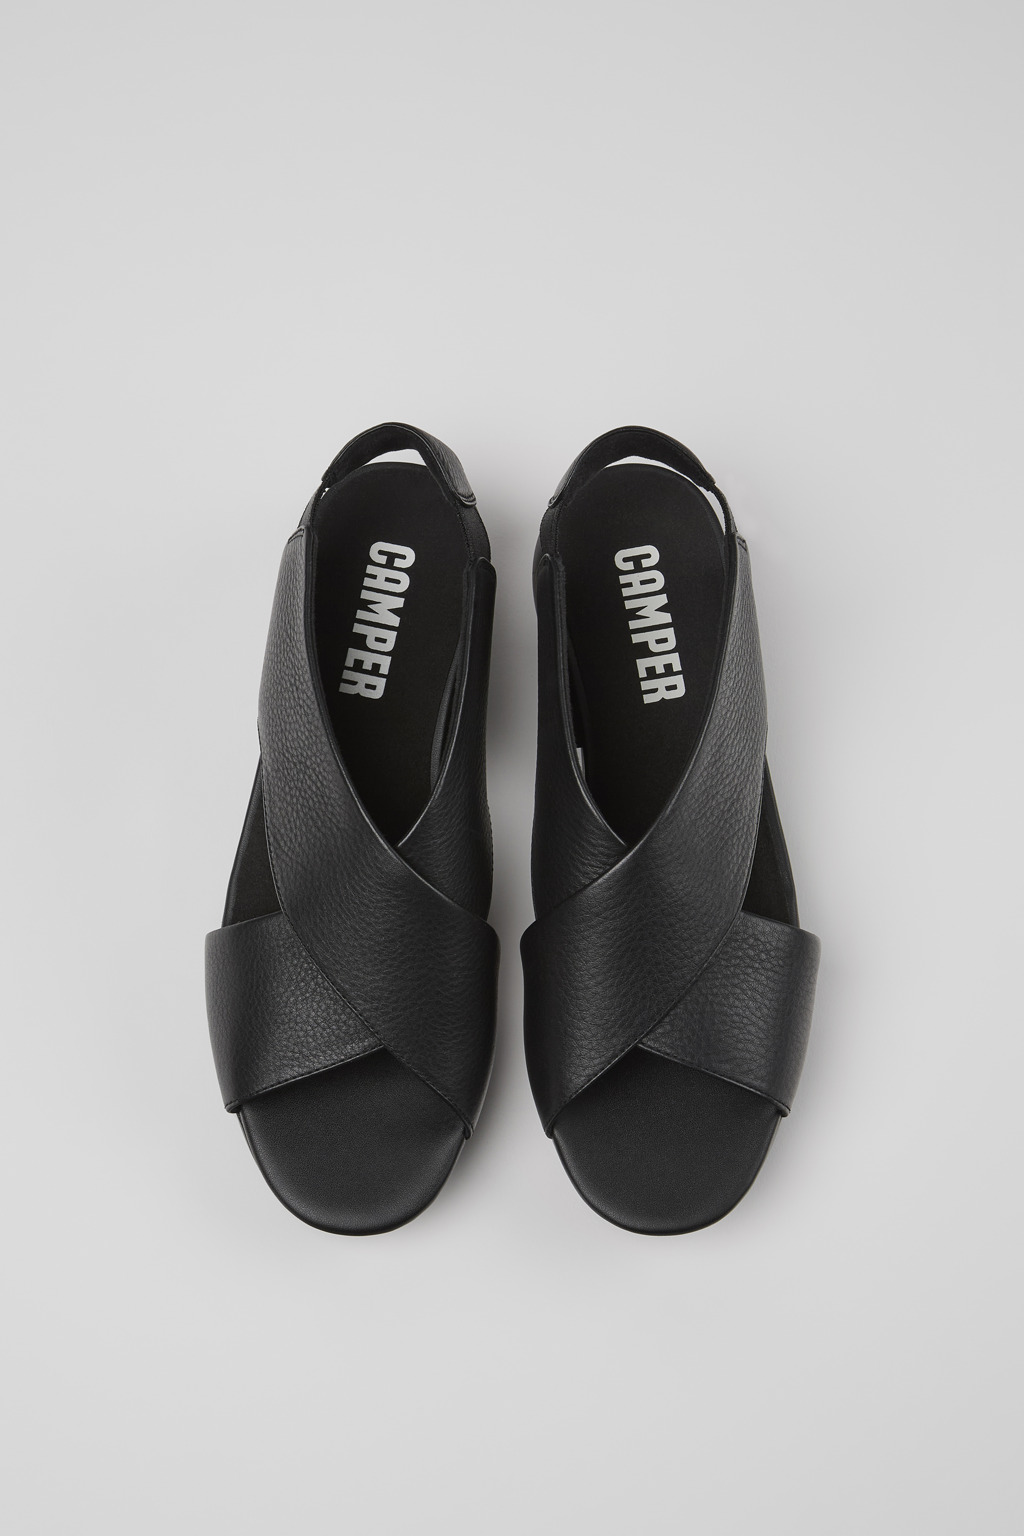 BALLOON Black Sandals for Women - Camper Shoes